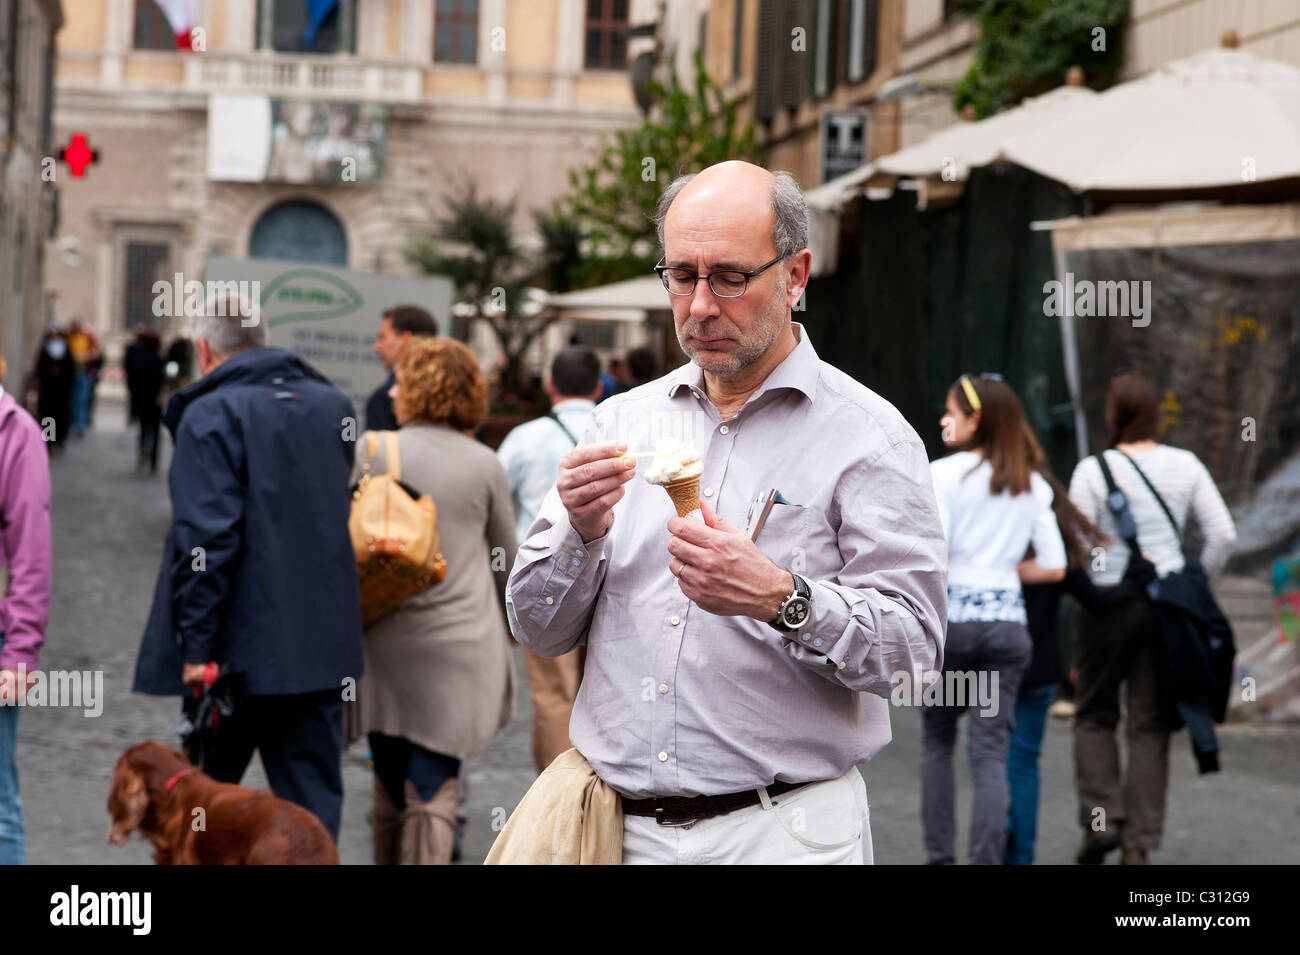 Rome, Italy -April 22, 2011 - A mature man eating ice cream . Stock Photo